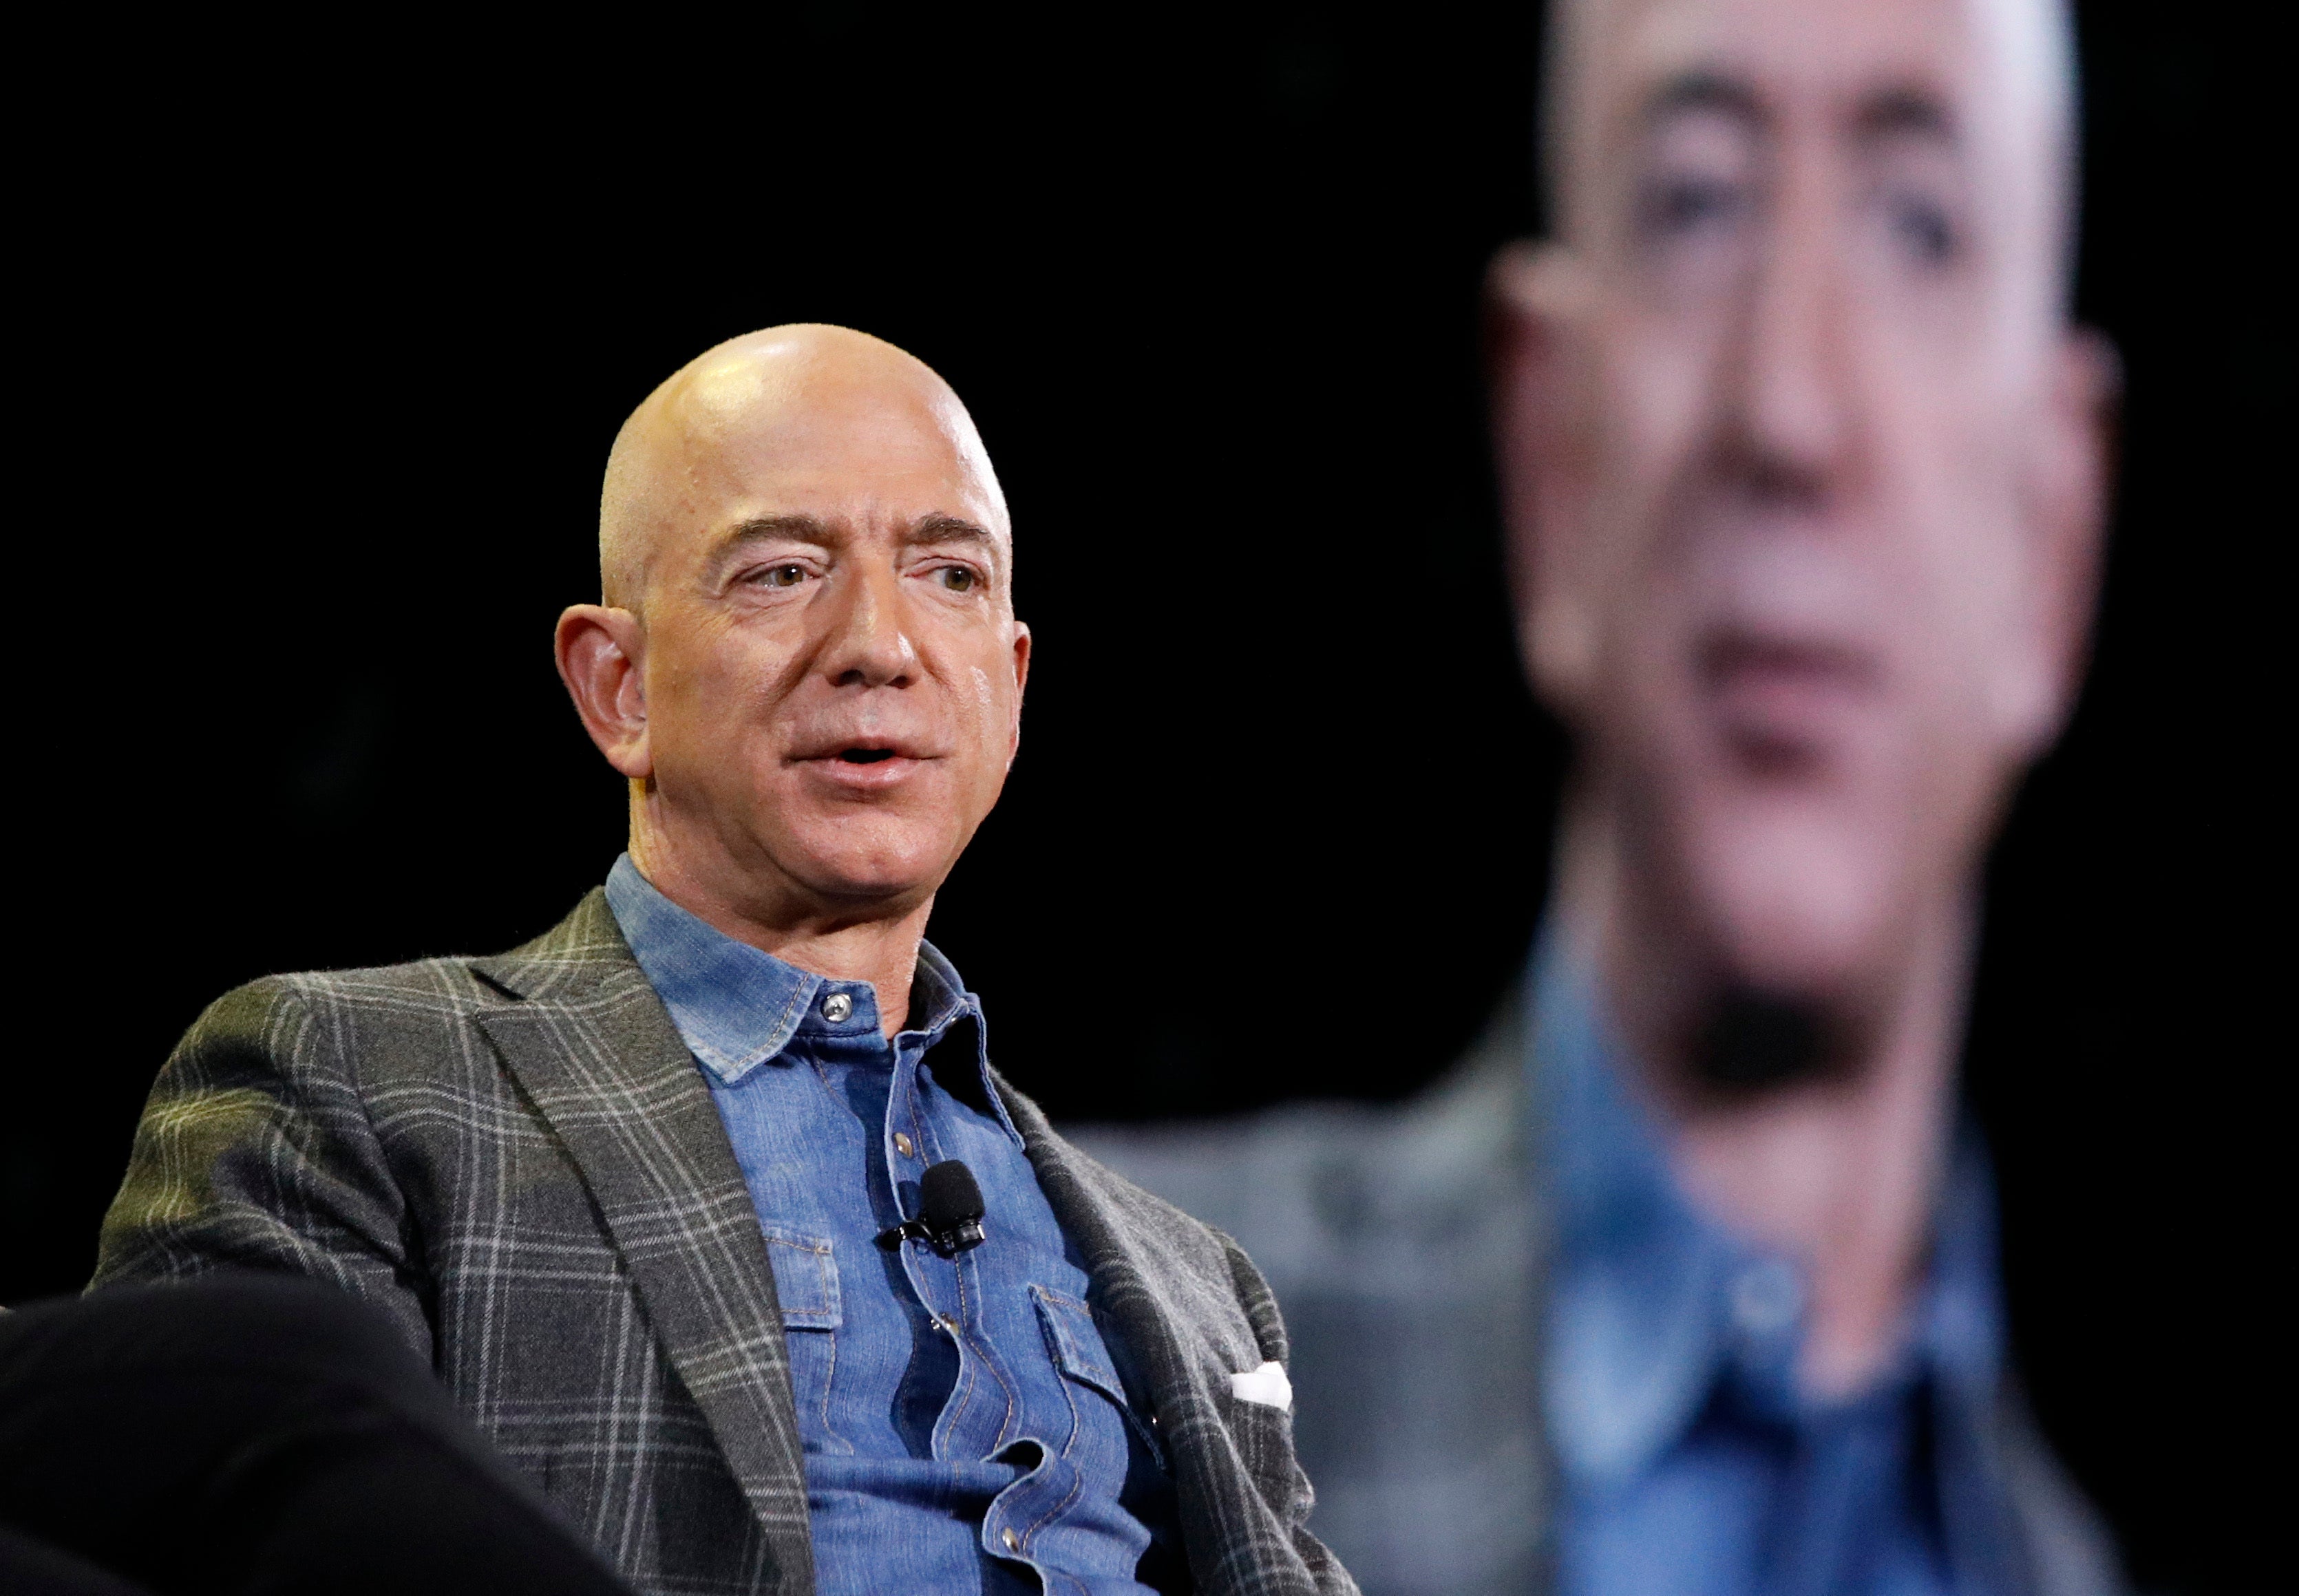 Amazon founder jeff Bezos stepped down as CEO this week